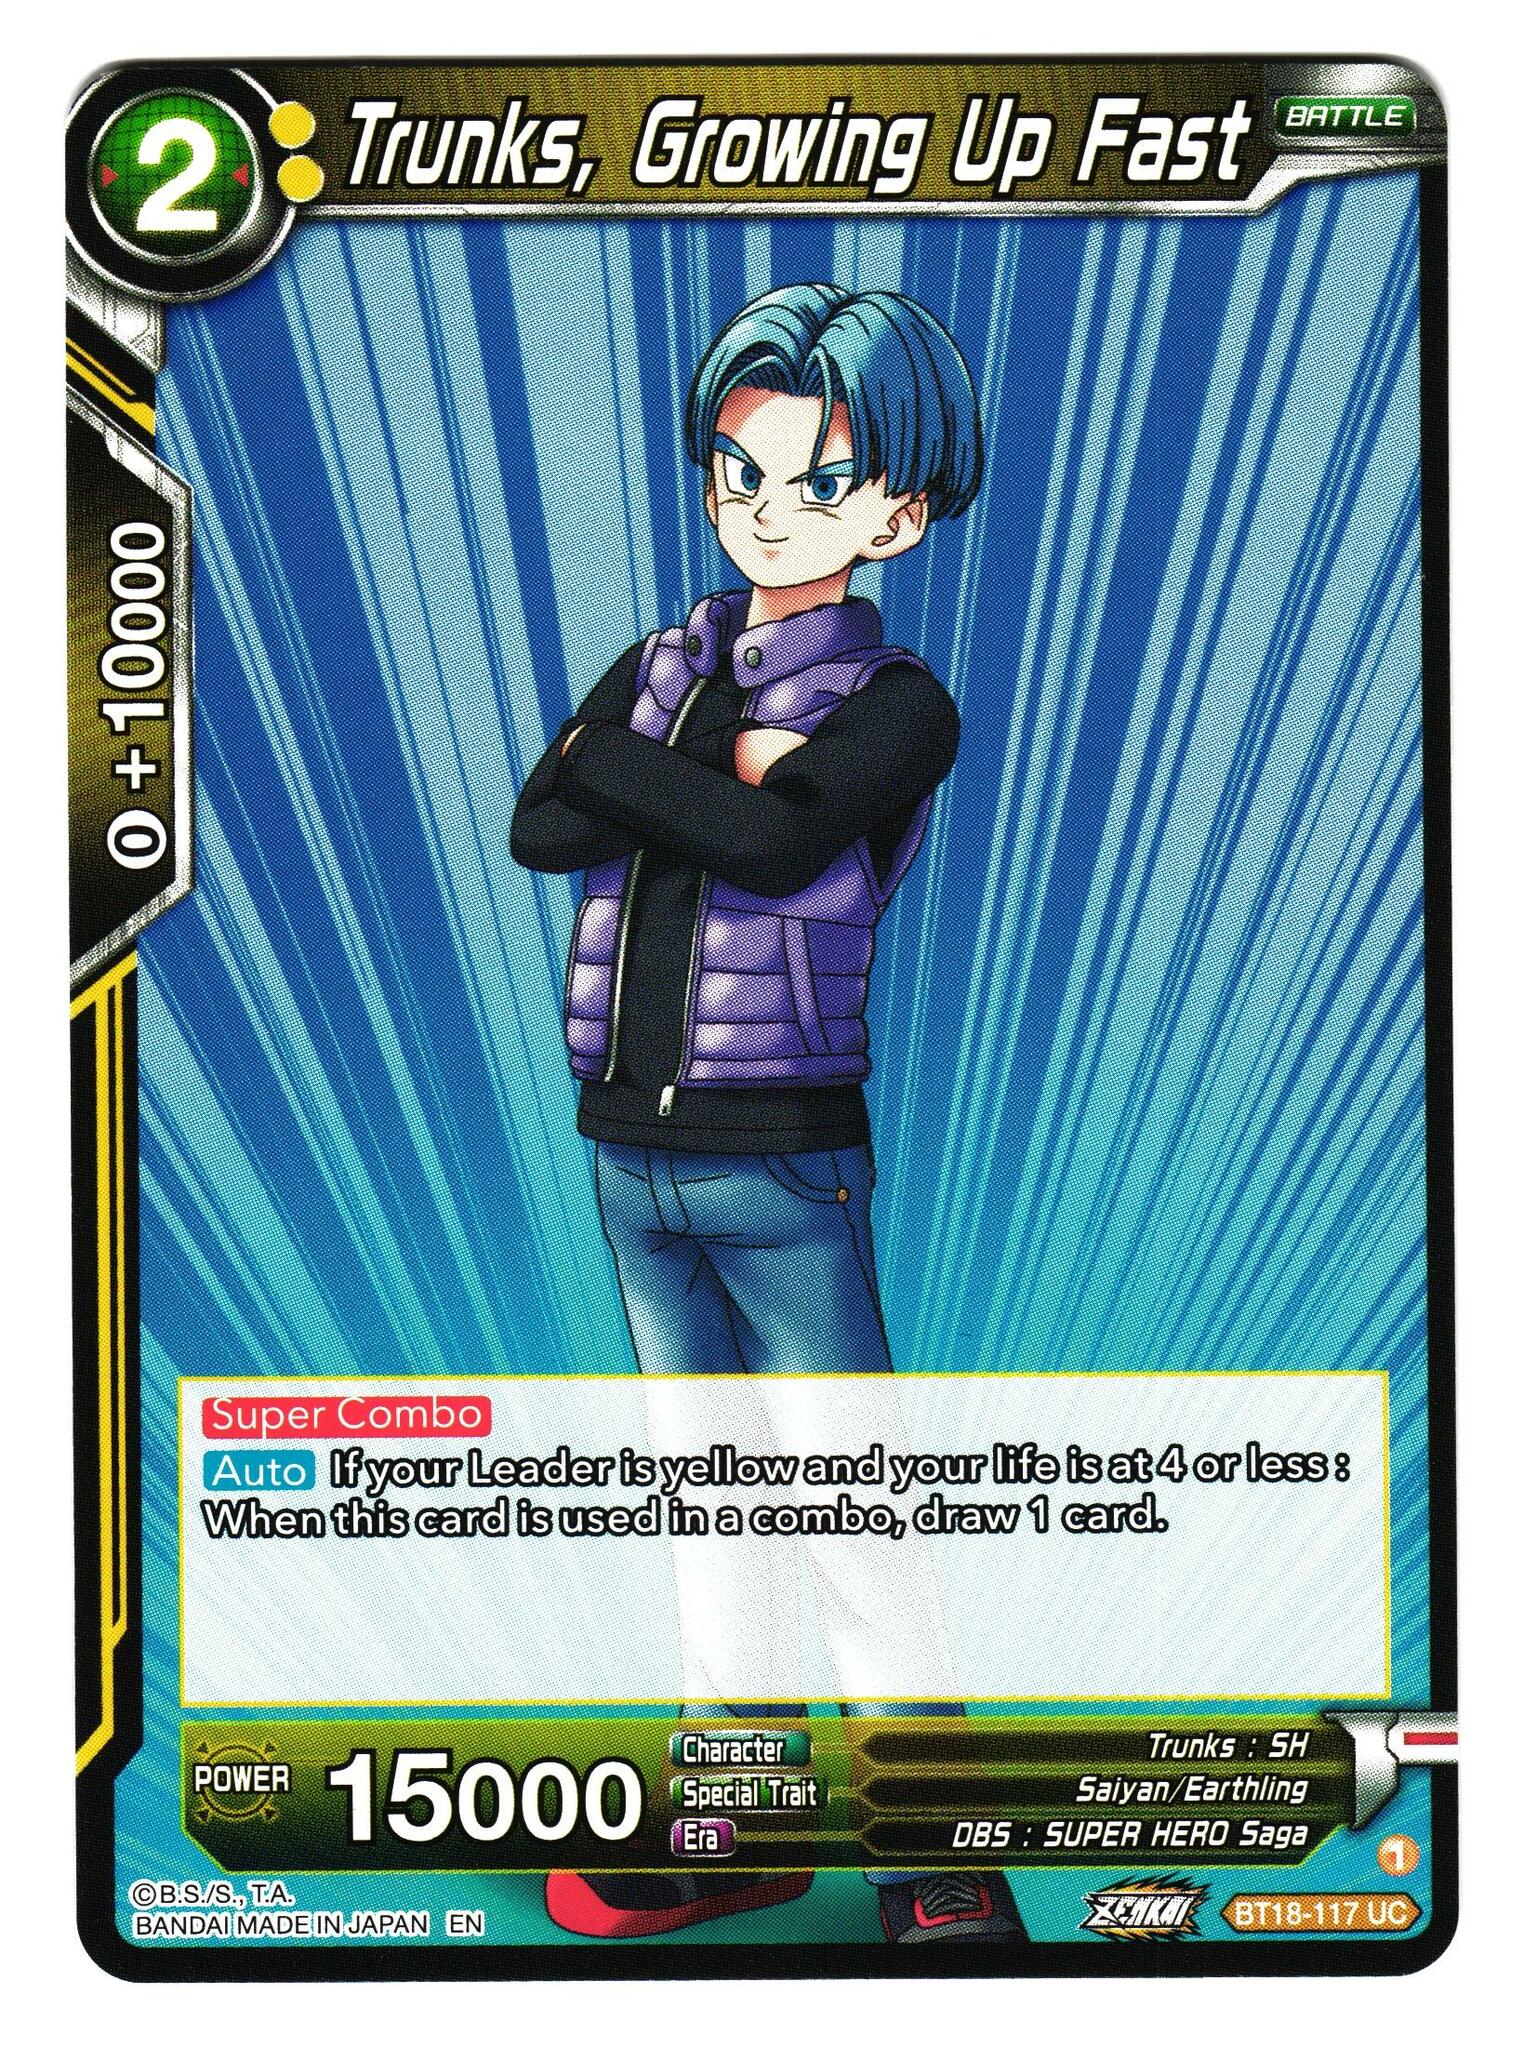 Trunks Growing Up Fast Bt18-117 Uncommon Dawn Of The Z-Legends Dragon Ball